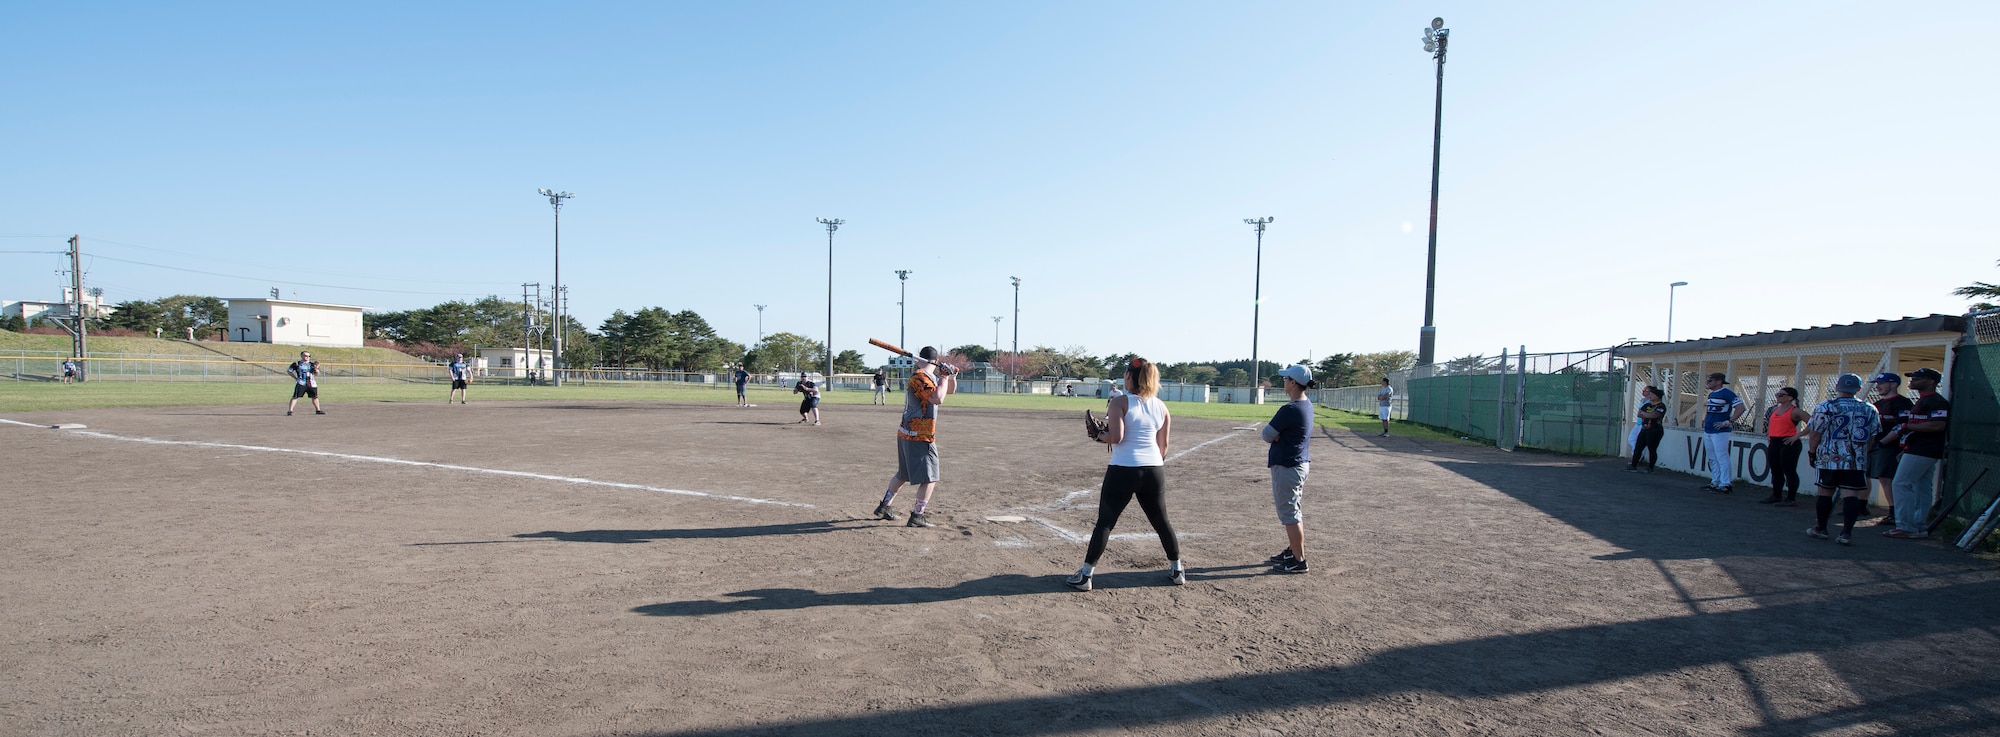 The 35th Security Forces Squadron and 35th Medical Operations Squadron compete in a match during the 2019 Cinco de Mayo softball tournament at Misawa Air Base, Japan, May 4, 2019.  Both teams played the opening match for the tournament, garnering spectators and supporting relations with neighboring units on Misawa Air Base. (U.S. Air Force photo by Branden Yamada)